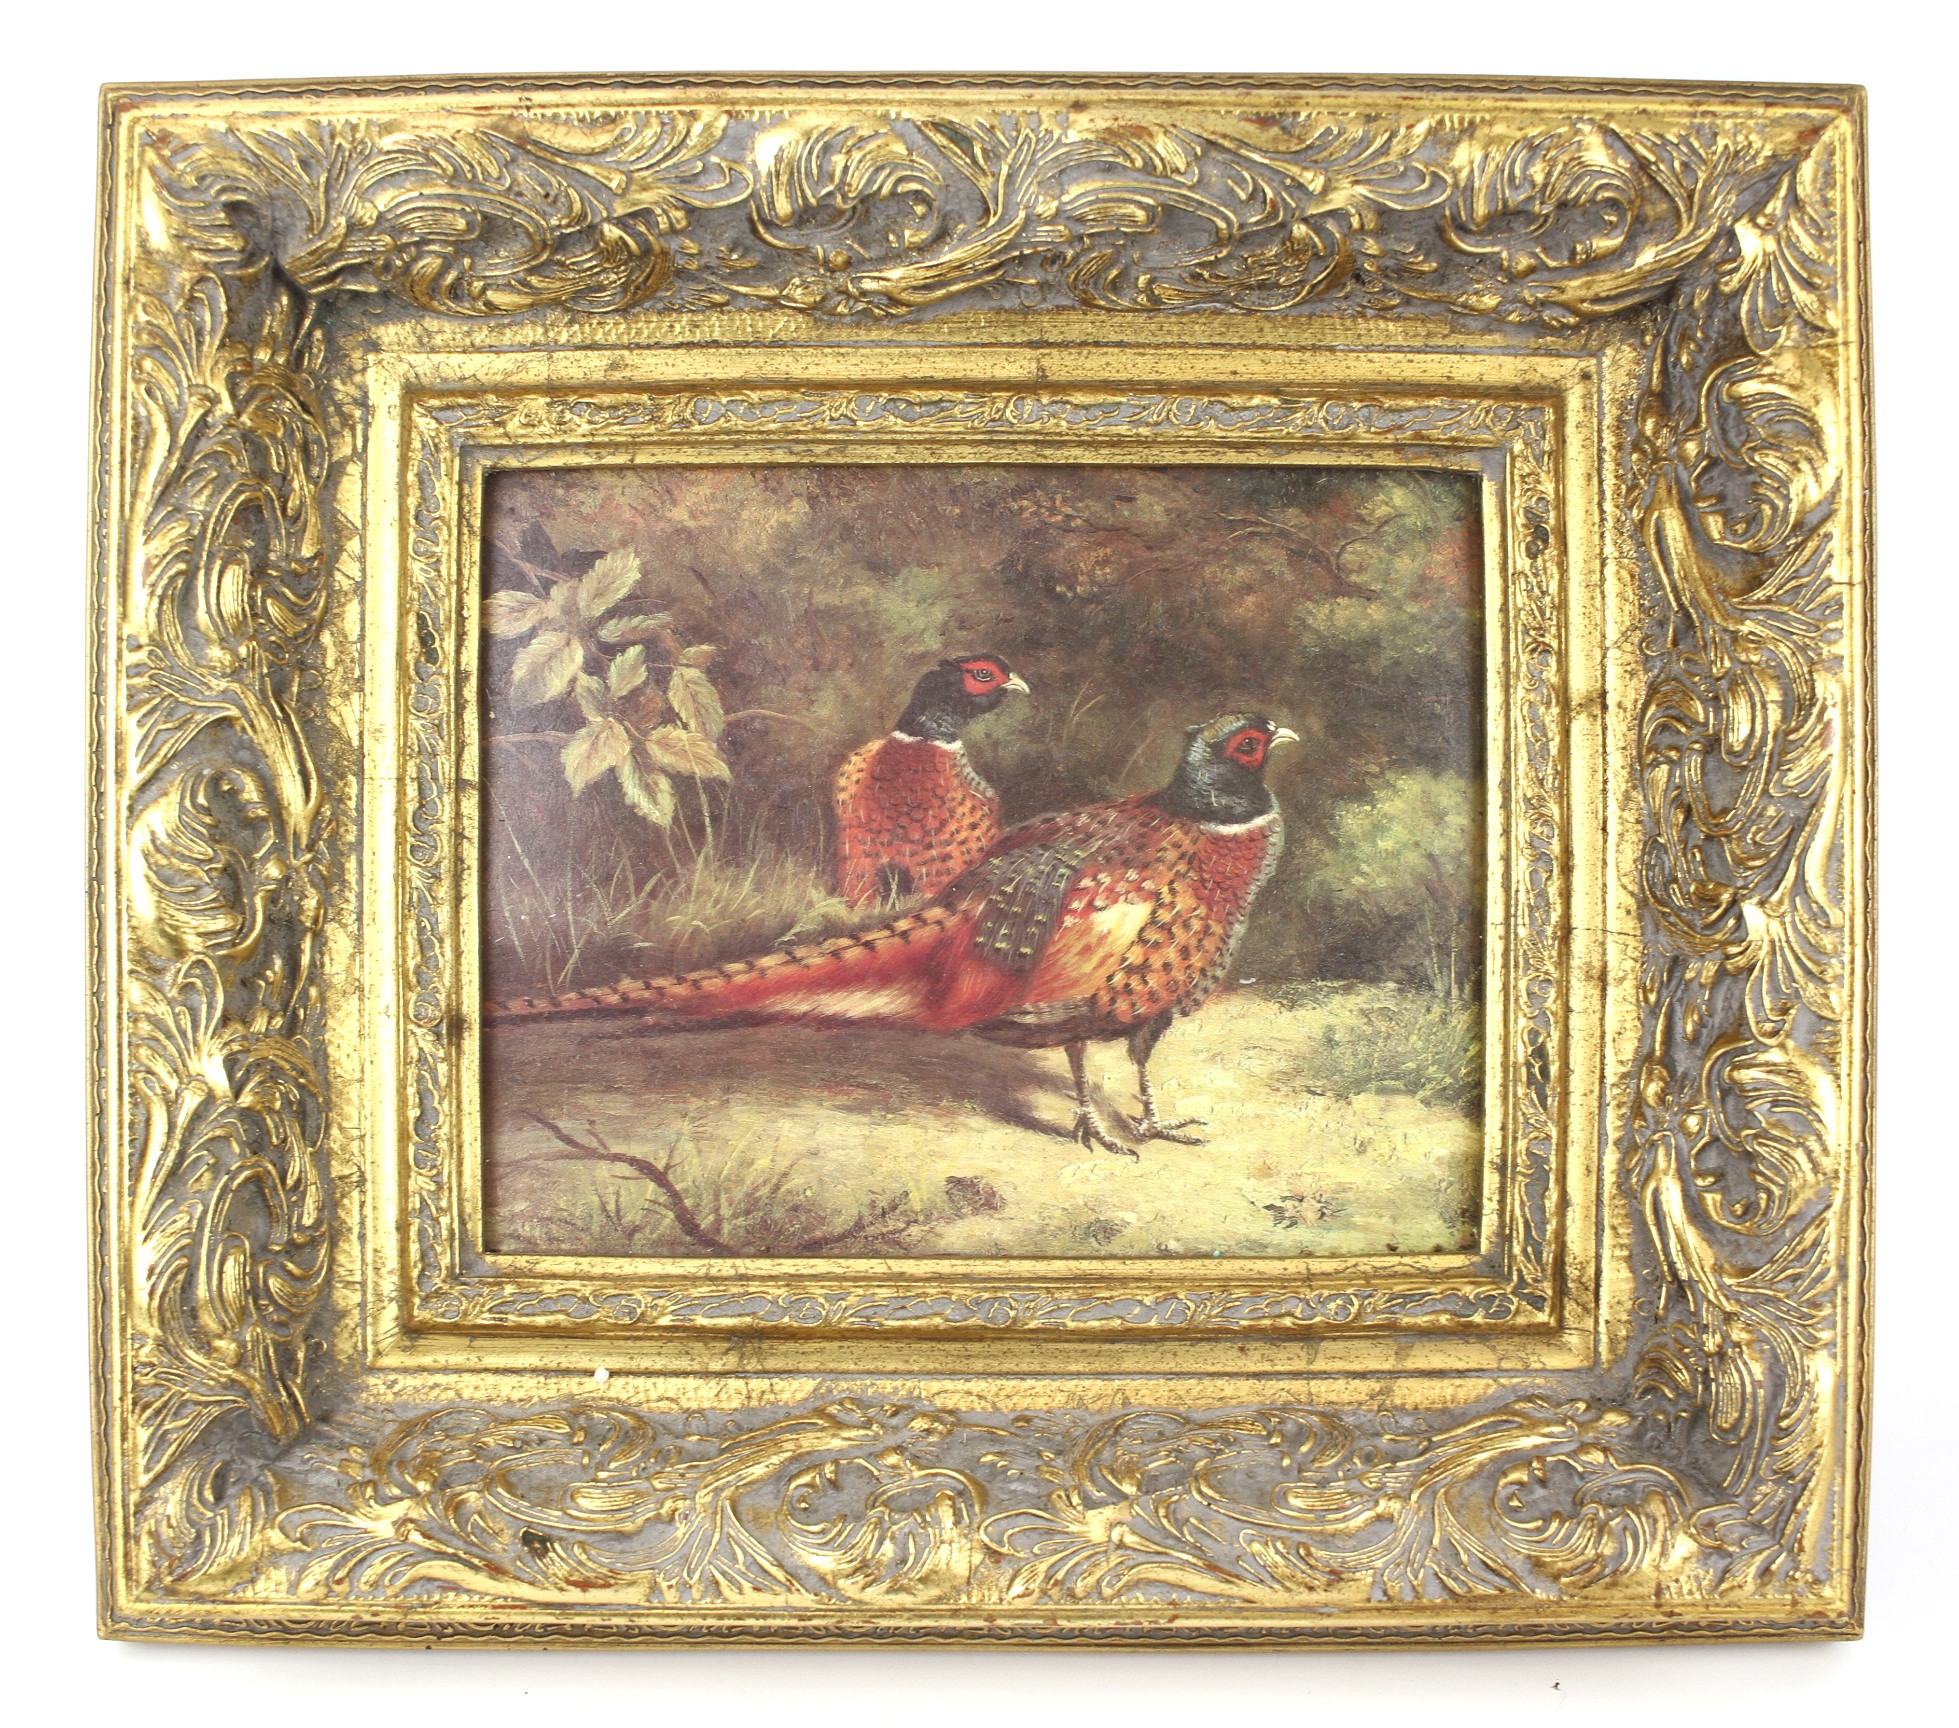 A 20th century print depicting two pheasants in a forest scene.